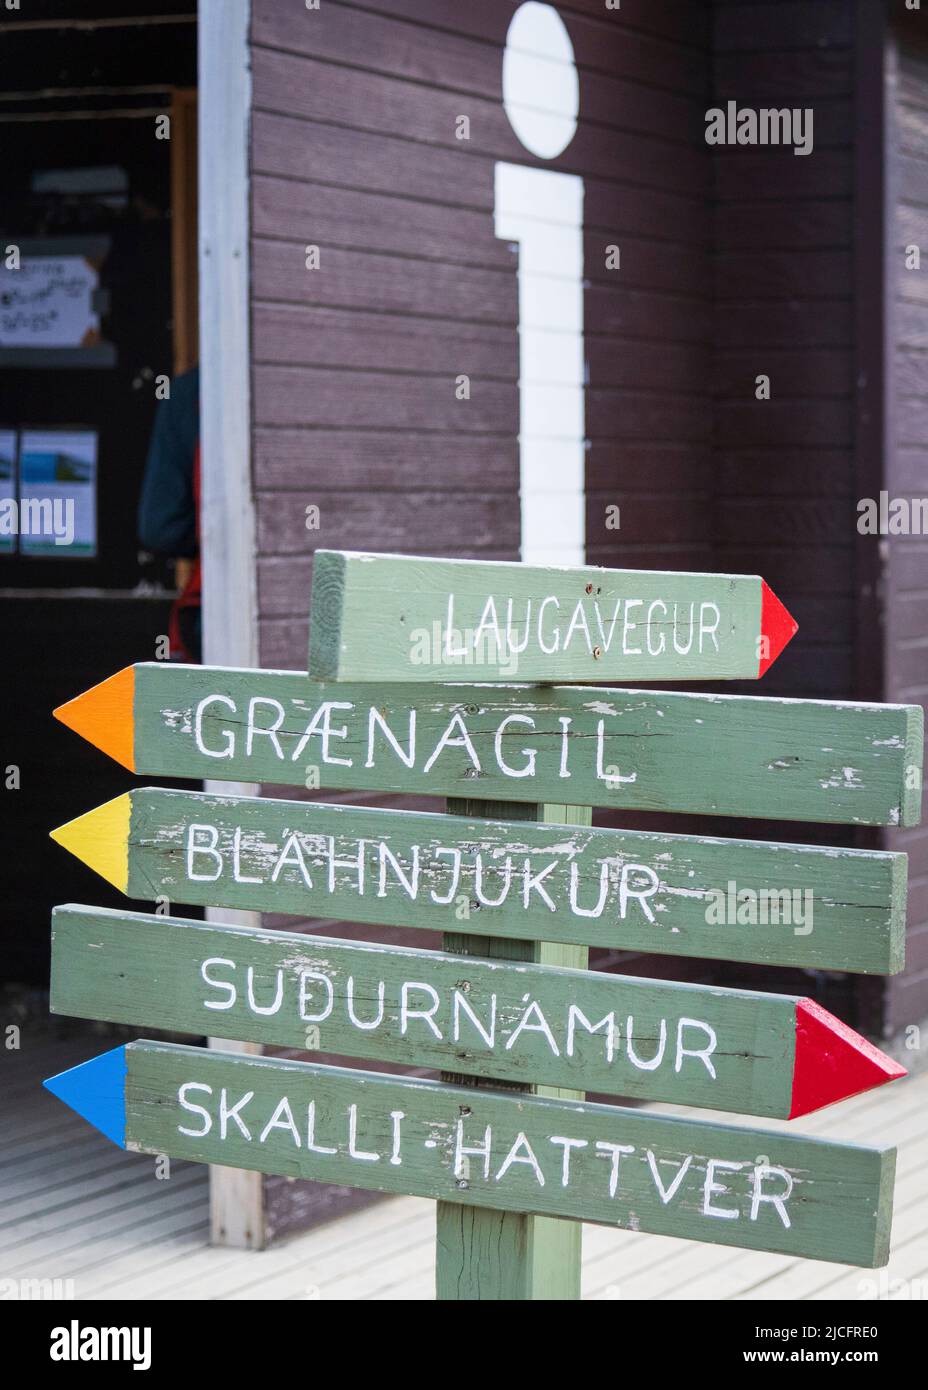 Laugavegur hiking trail is the most famous multi-day trekking tour in Iceland. Landscape photo from the area around Landmannalaugar, starting point of the long-distance hiking trail in the highlands of Iceland. Signpost Sudurnamur Skalli Hattver Stock Photo